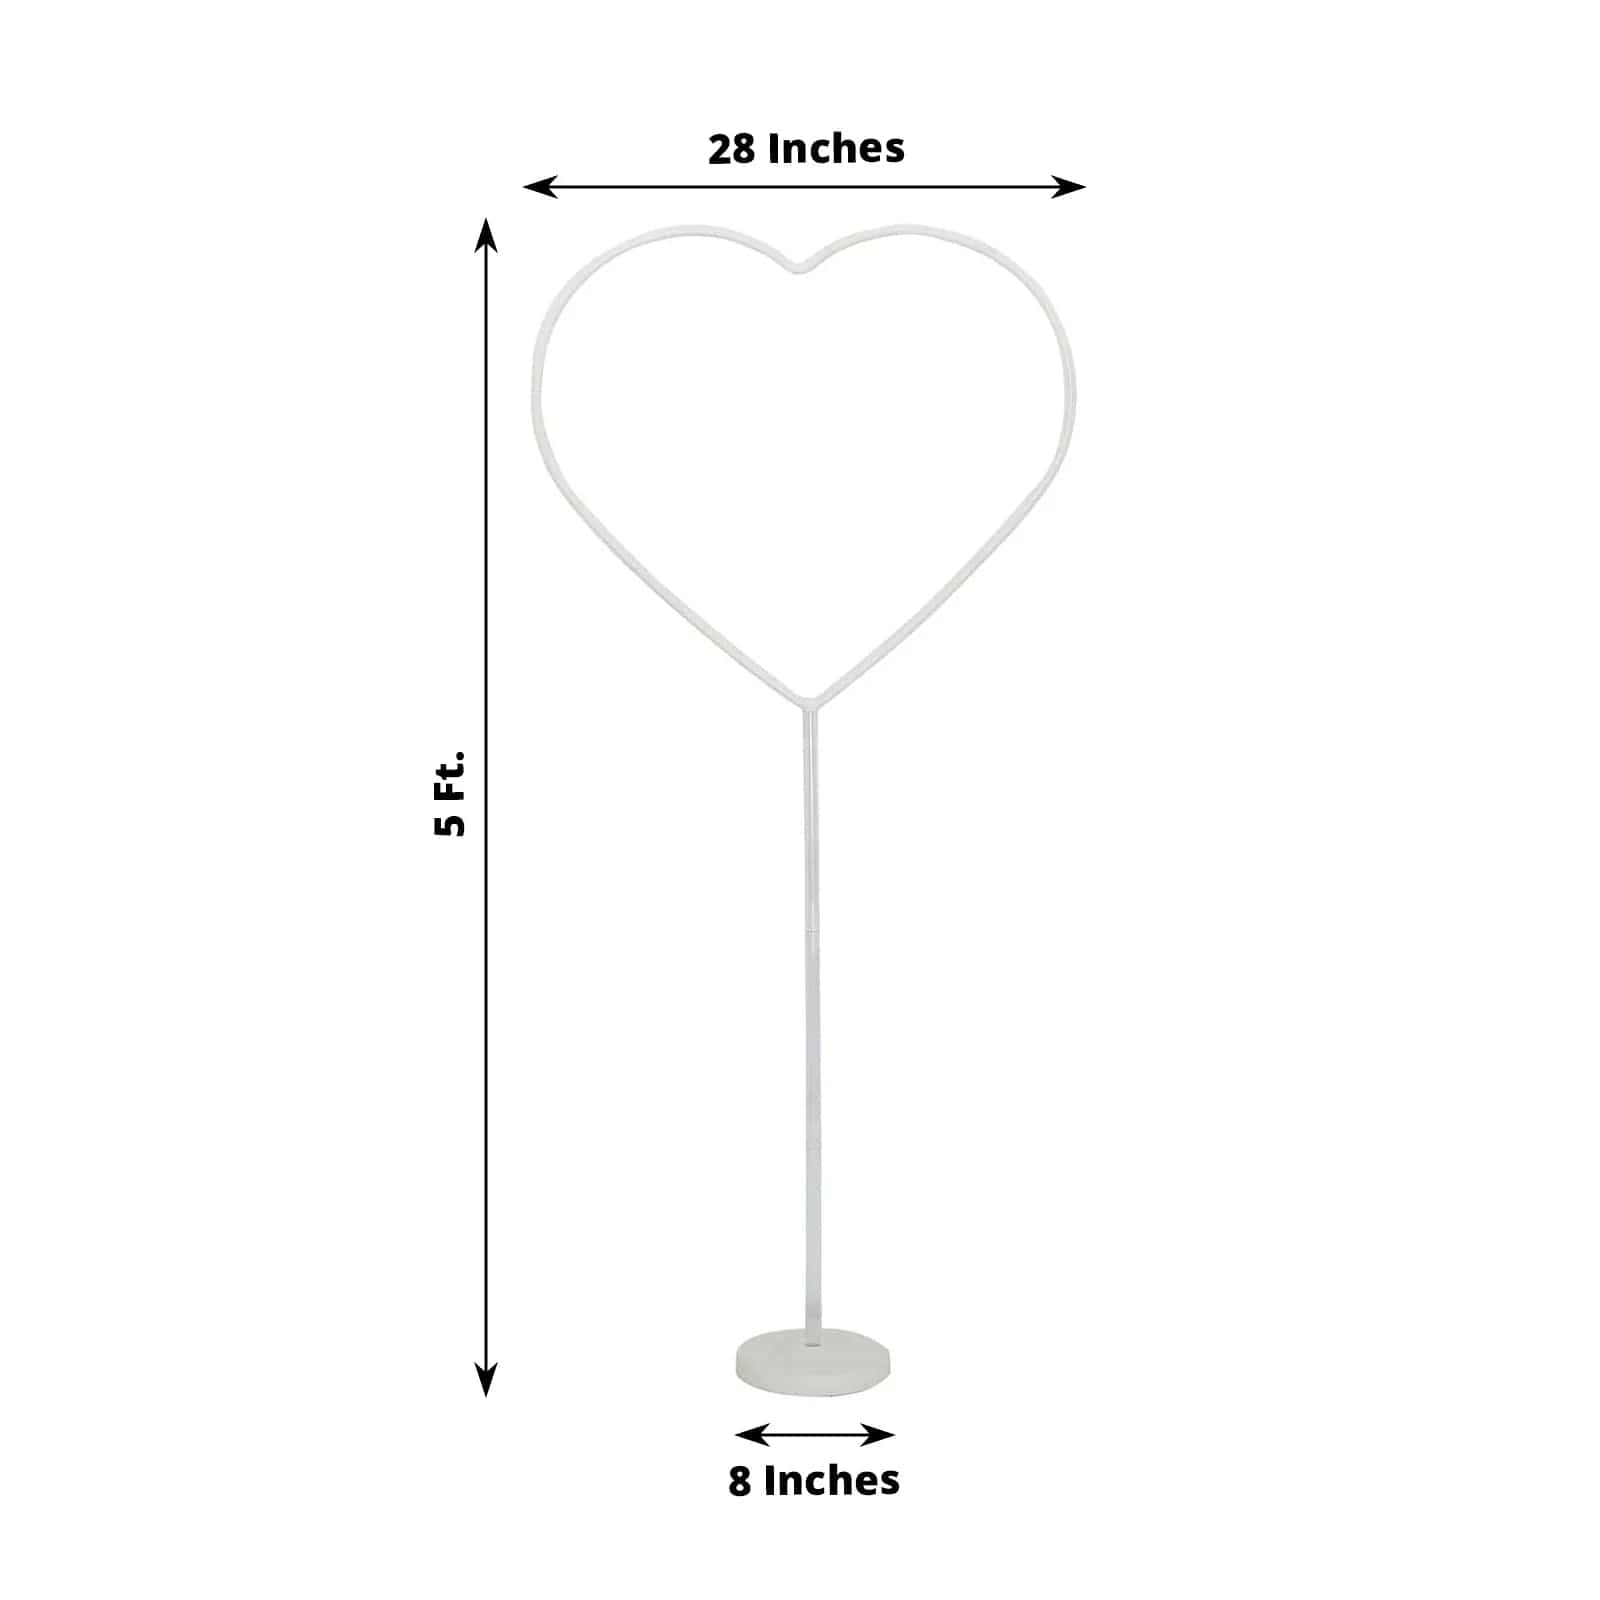 2 Heart Shaped Plastic Balloon Arch Stand Kit - White BLOON_STAND07_HRT5